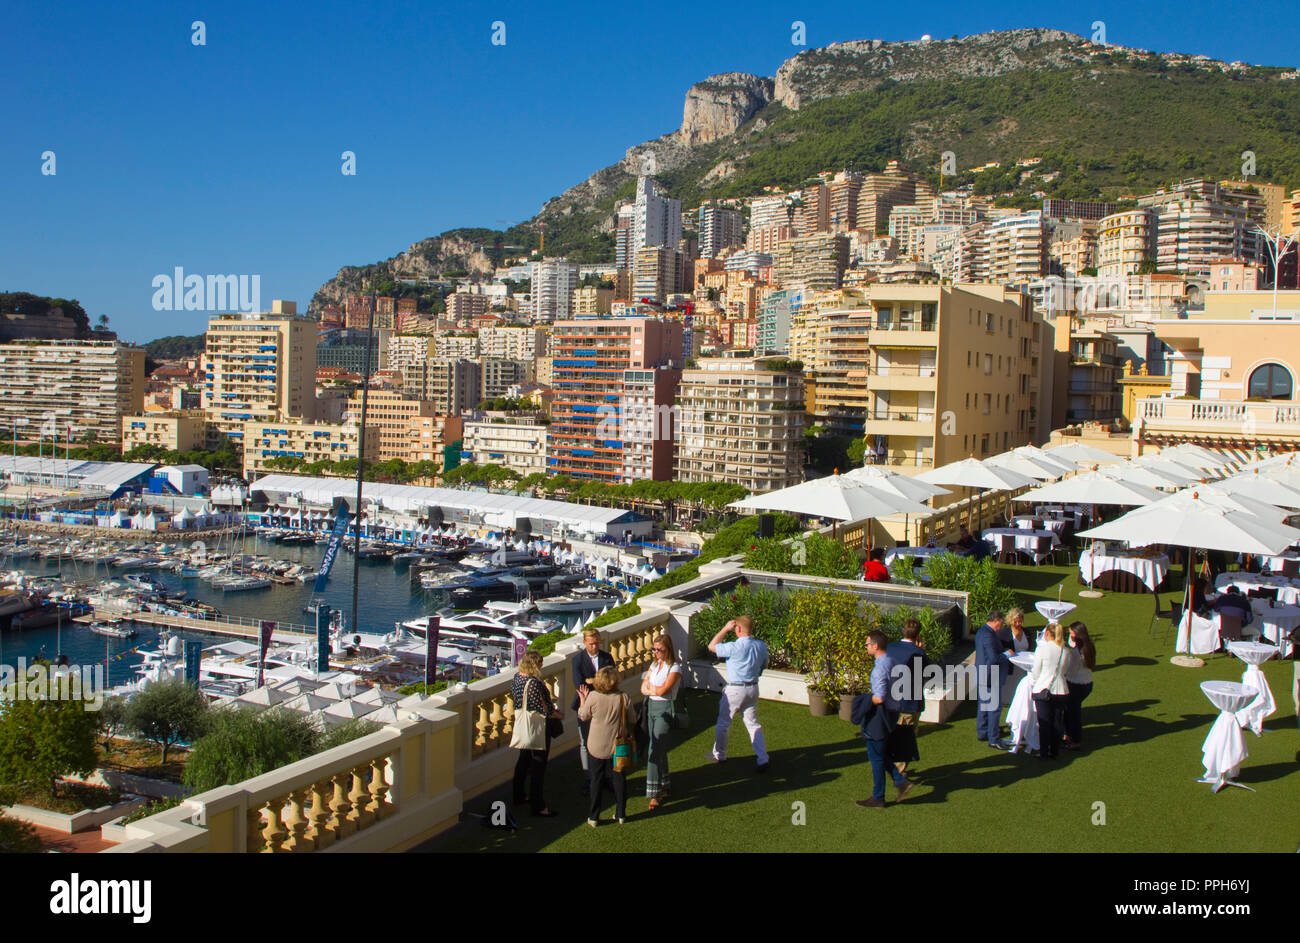 Monte Carlo, Monaco - September 26, 2018: Monaco Yacht Show, Heesen Yachts Press Conference at Hotel Hermitage. Yachts, Yachten, Boot, Boote, Ship, Ships, Superyacht | usage worldwide Stock Photo